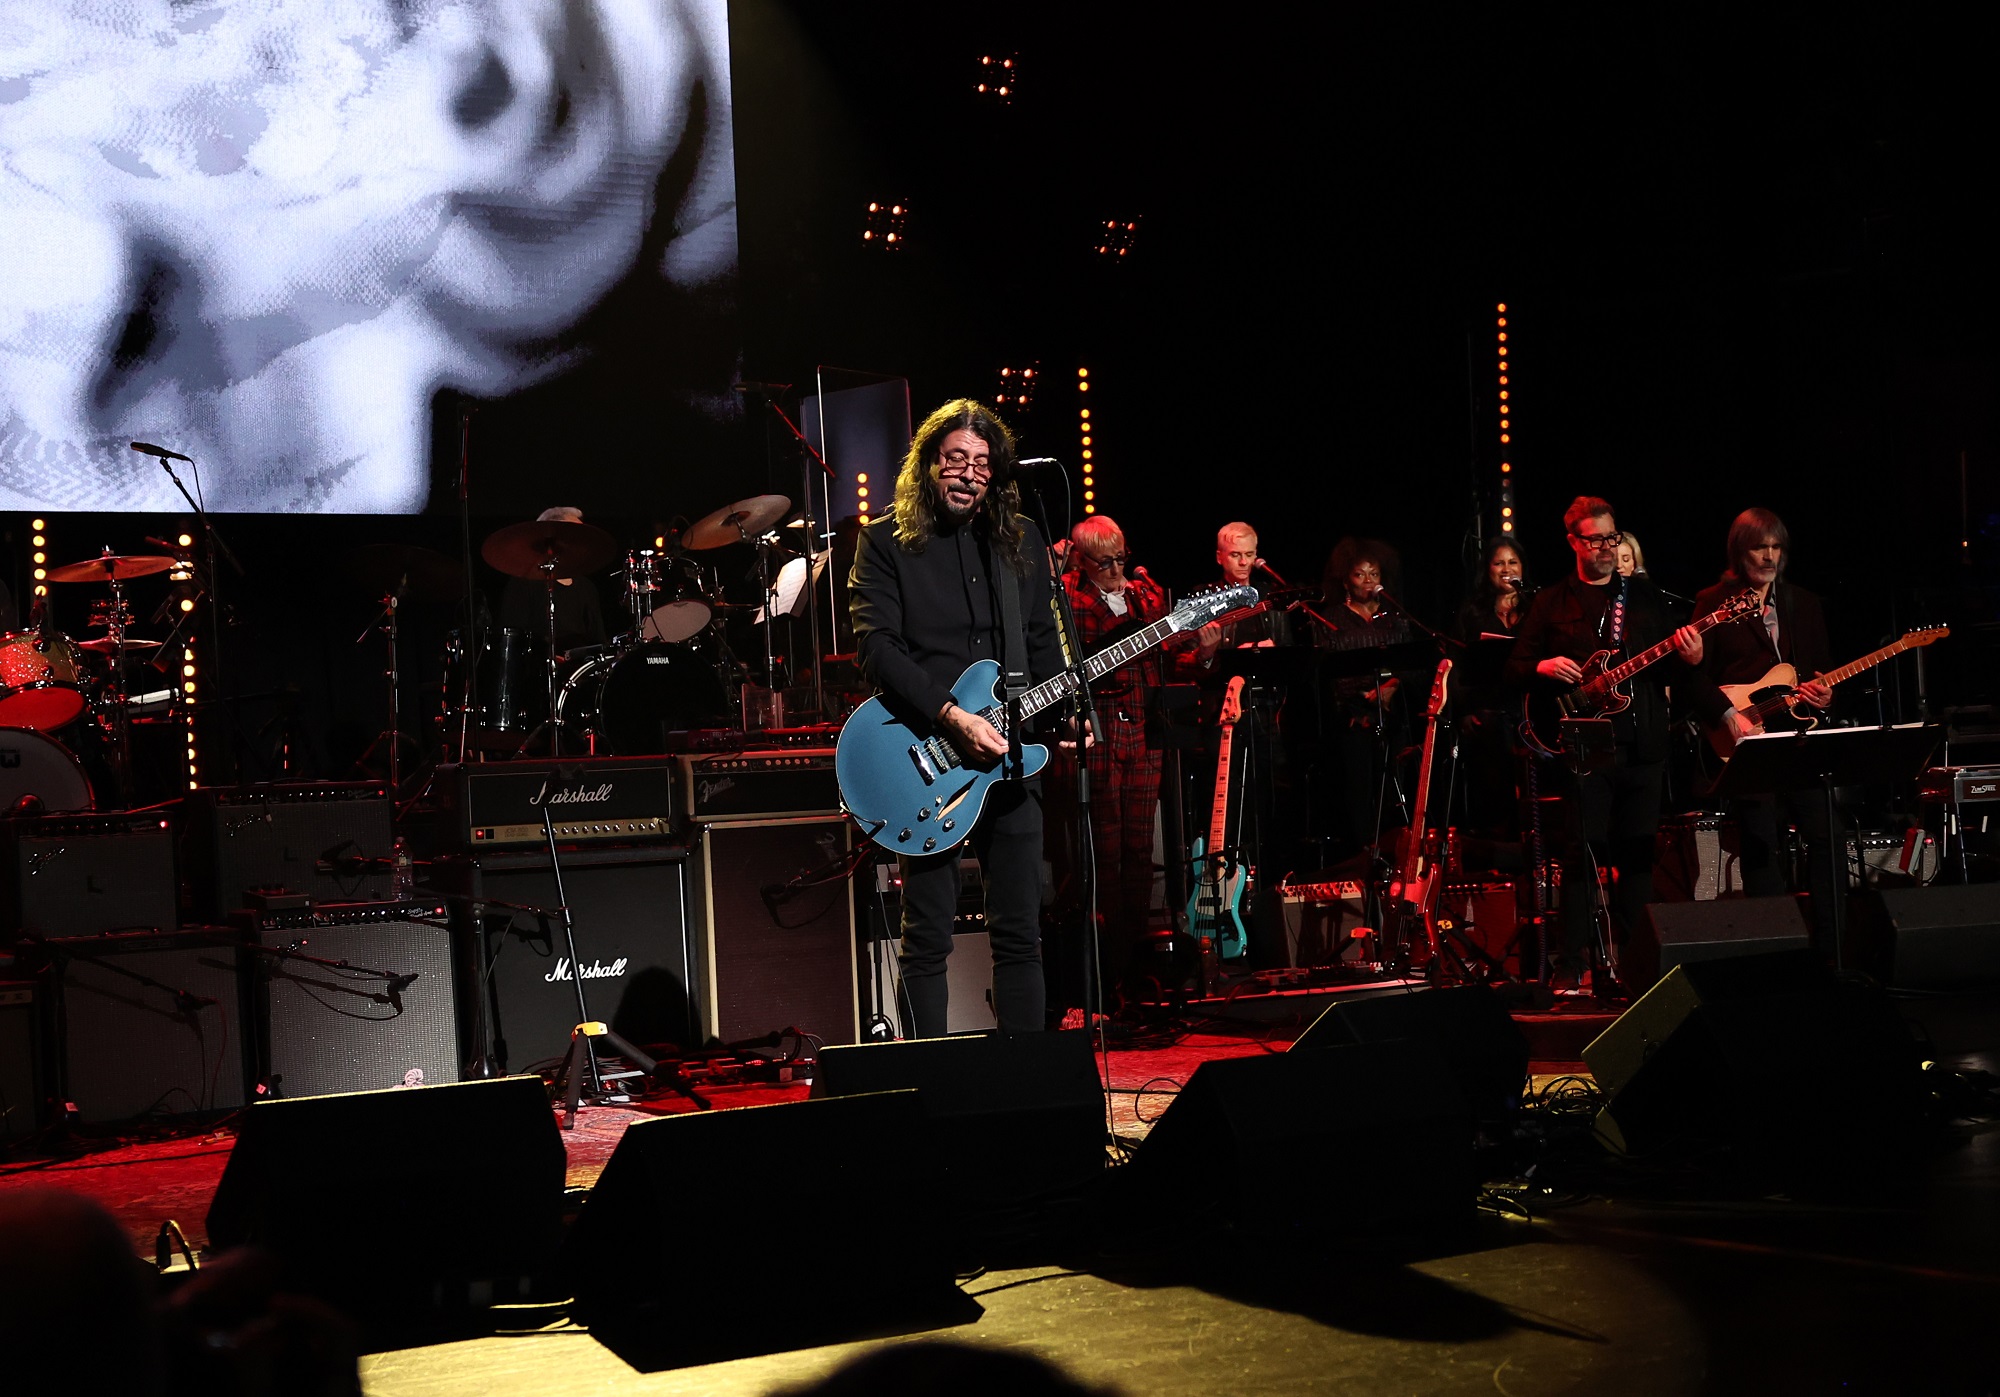 Dave Grohl, Don Felder & More Help Raise $3.8 Million for Charity, Throw Down Classic Performances at Love Rocks NYC